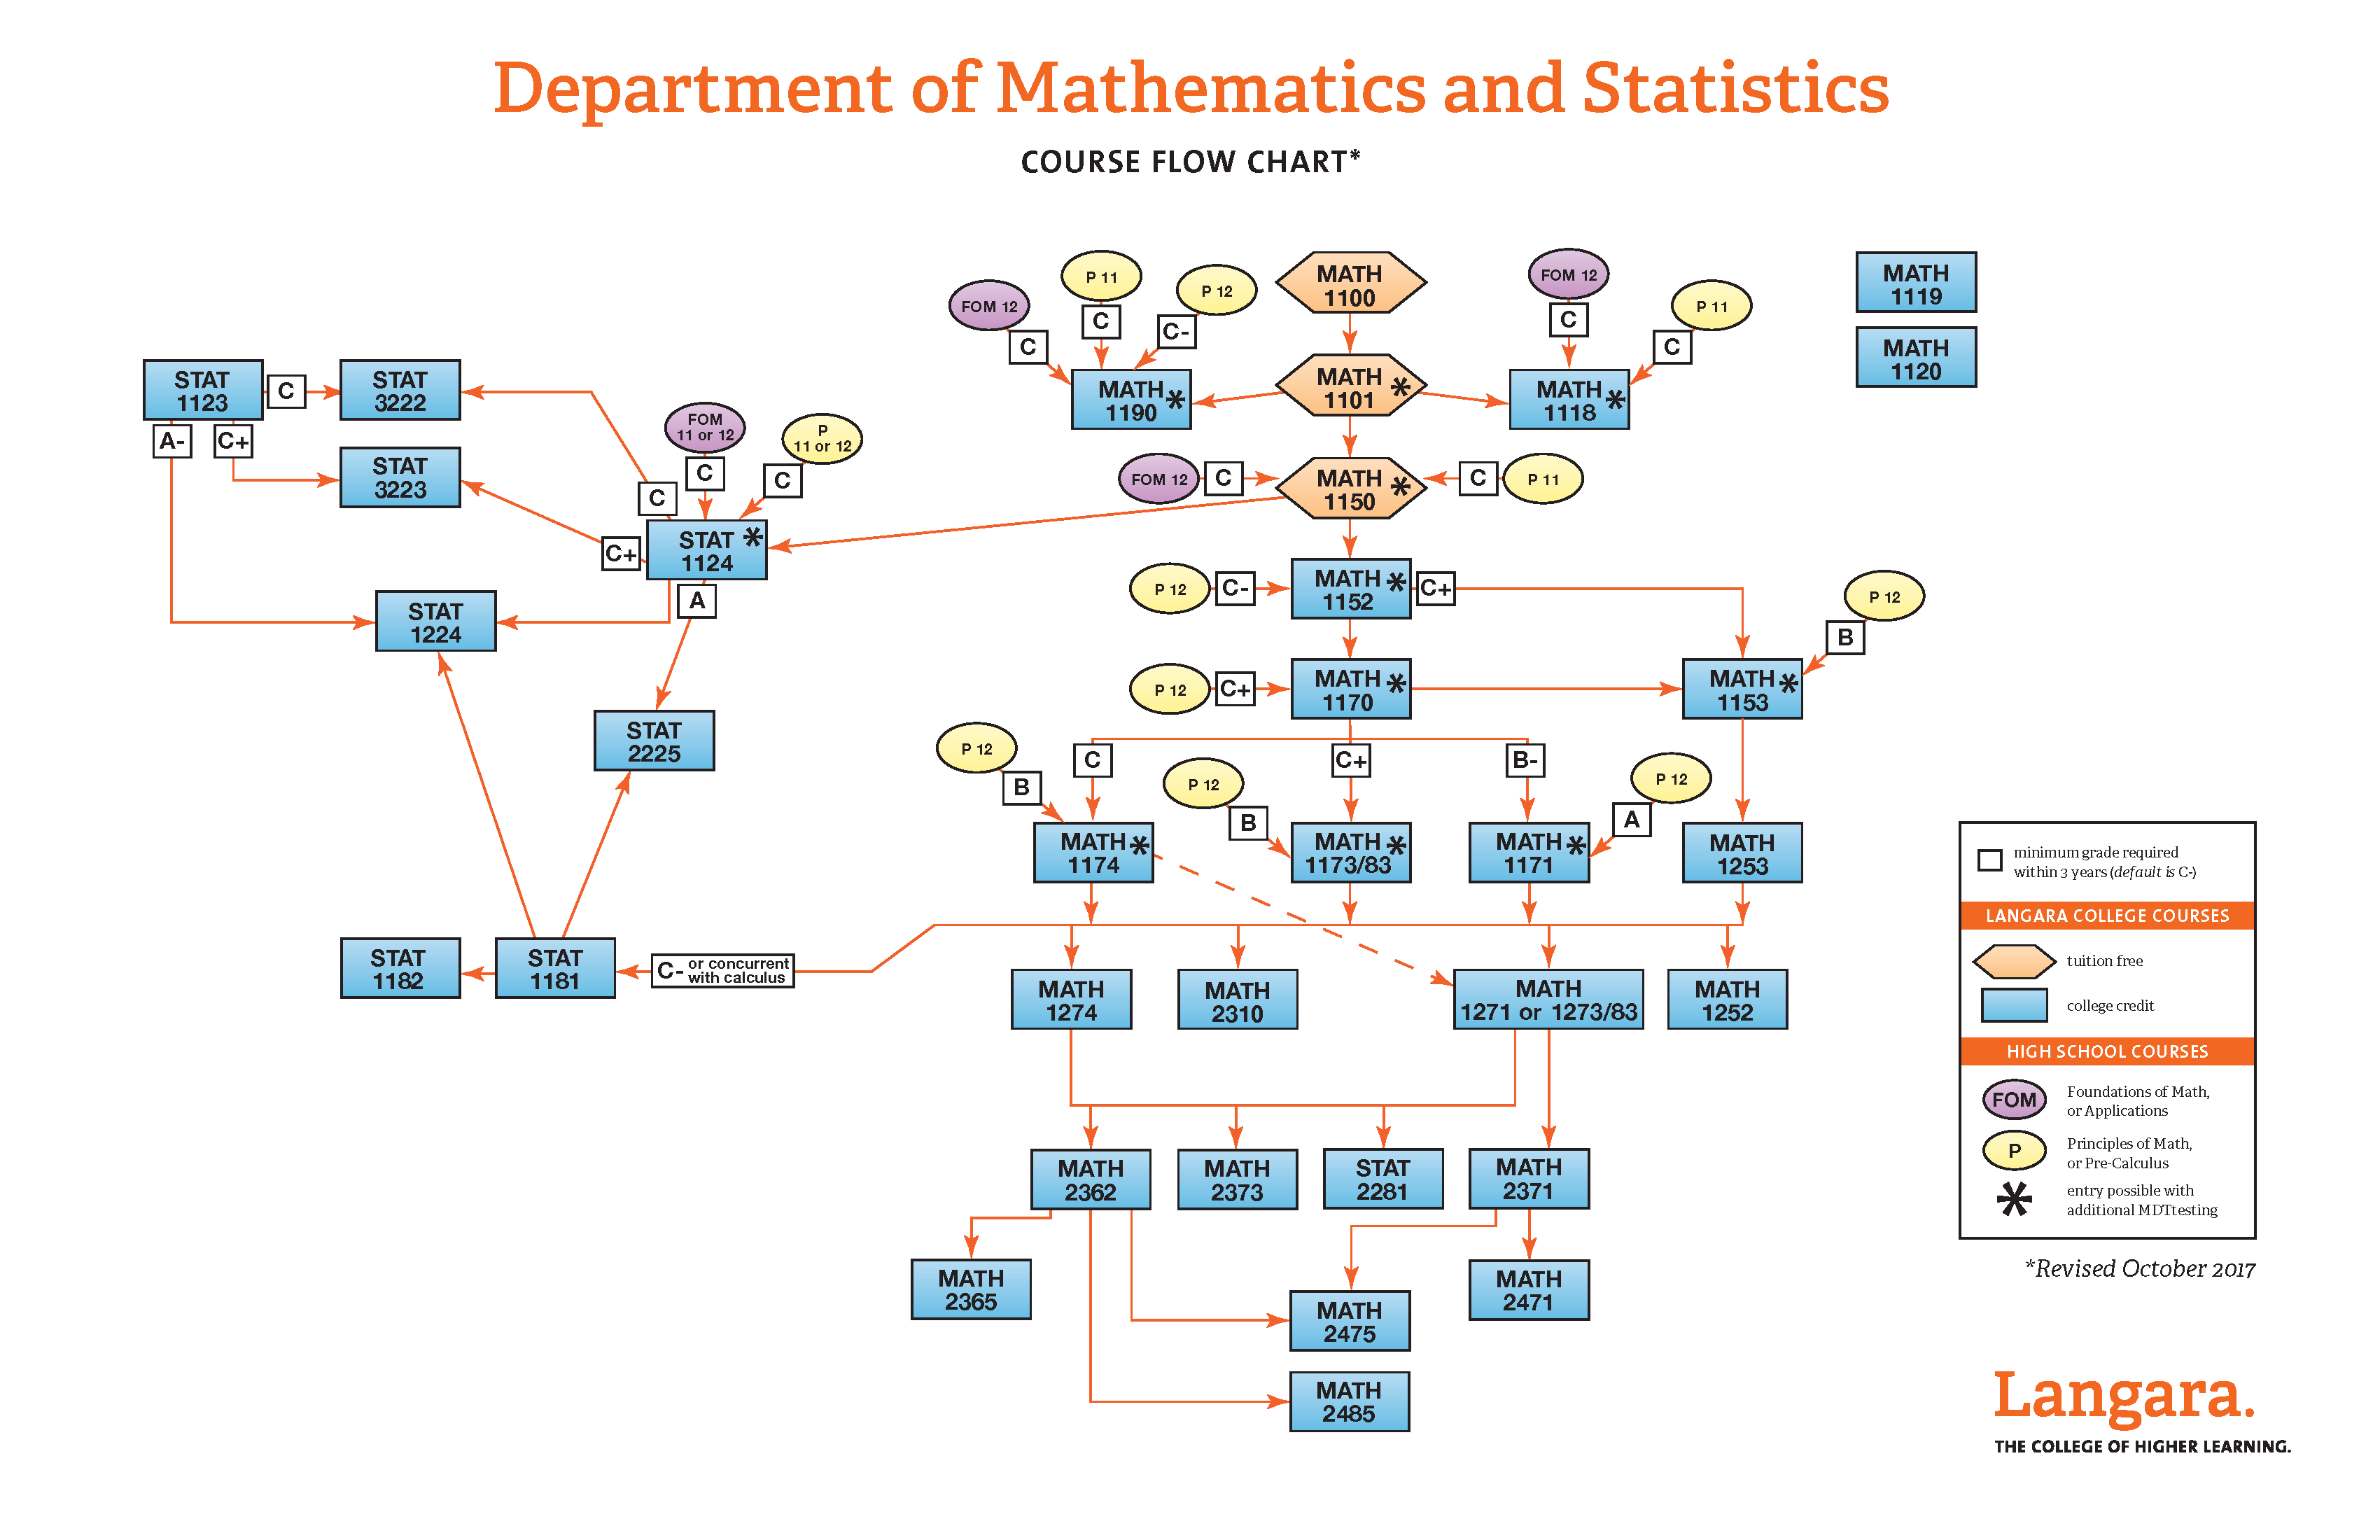 Flowchart of Math and Stat courses (prerequisites)